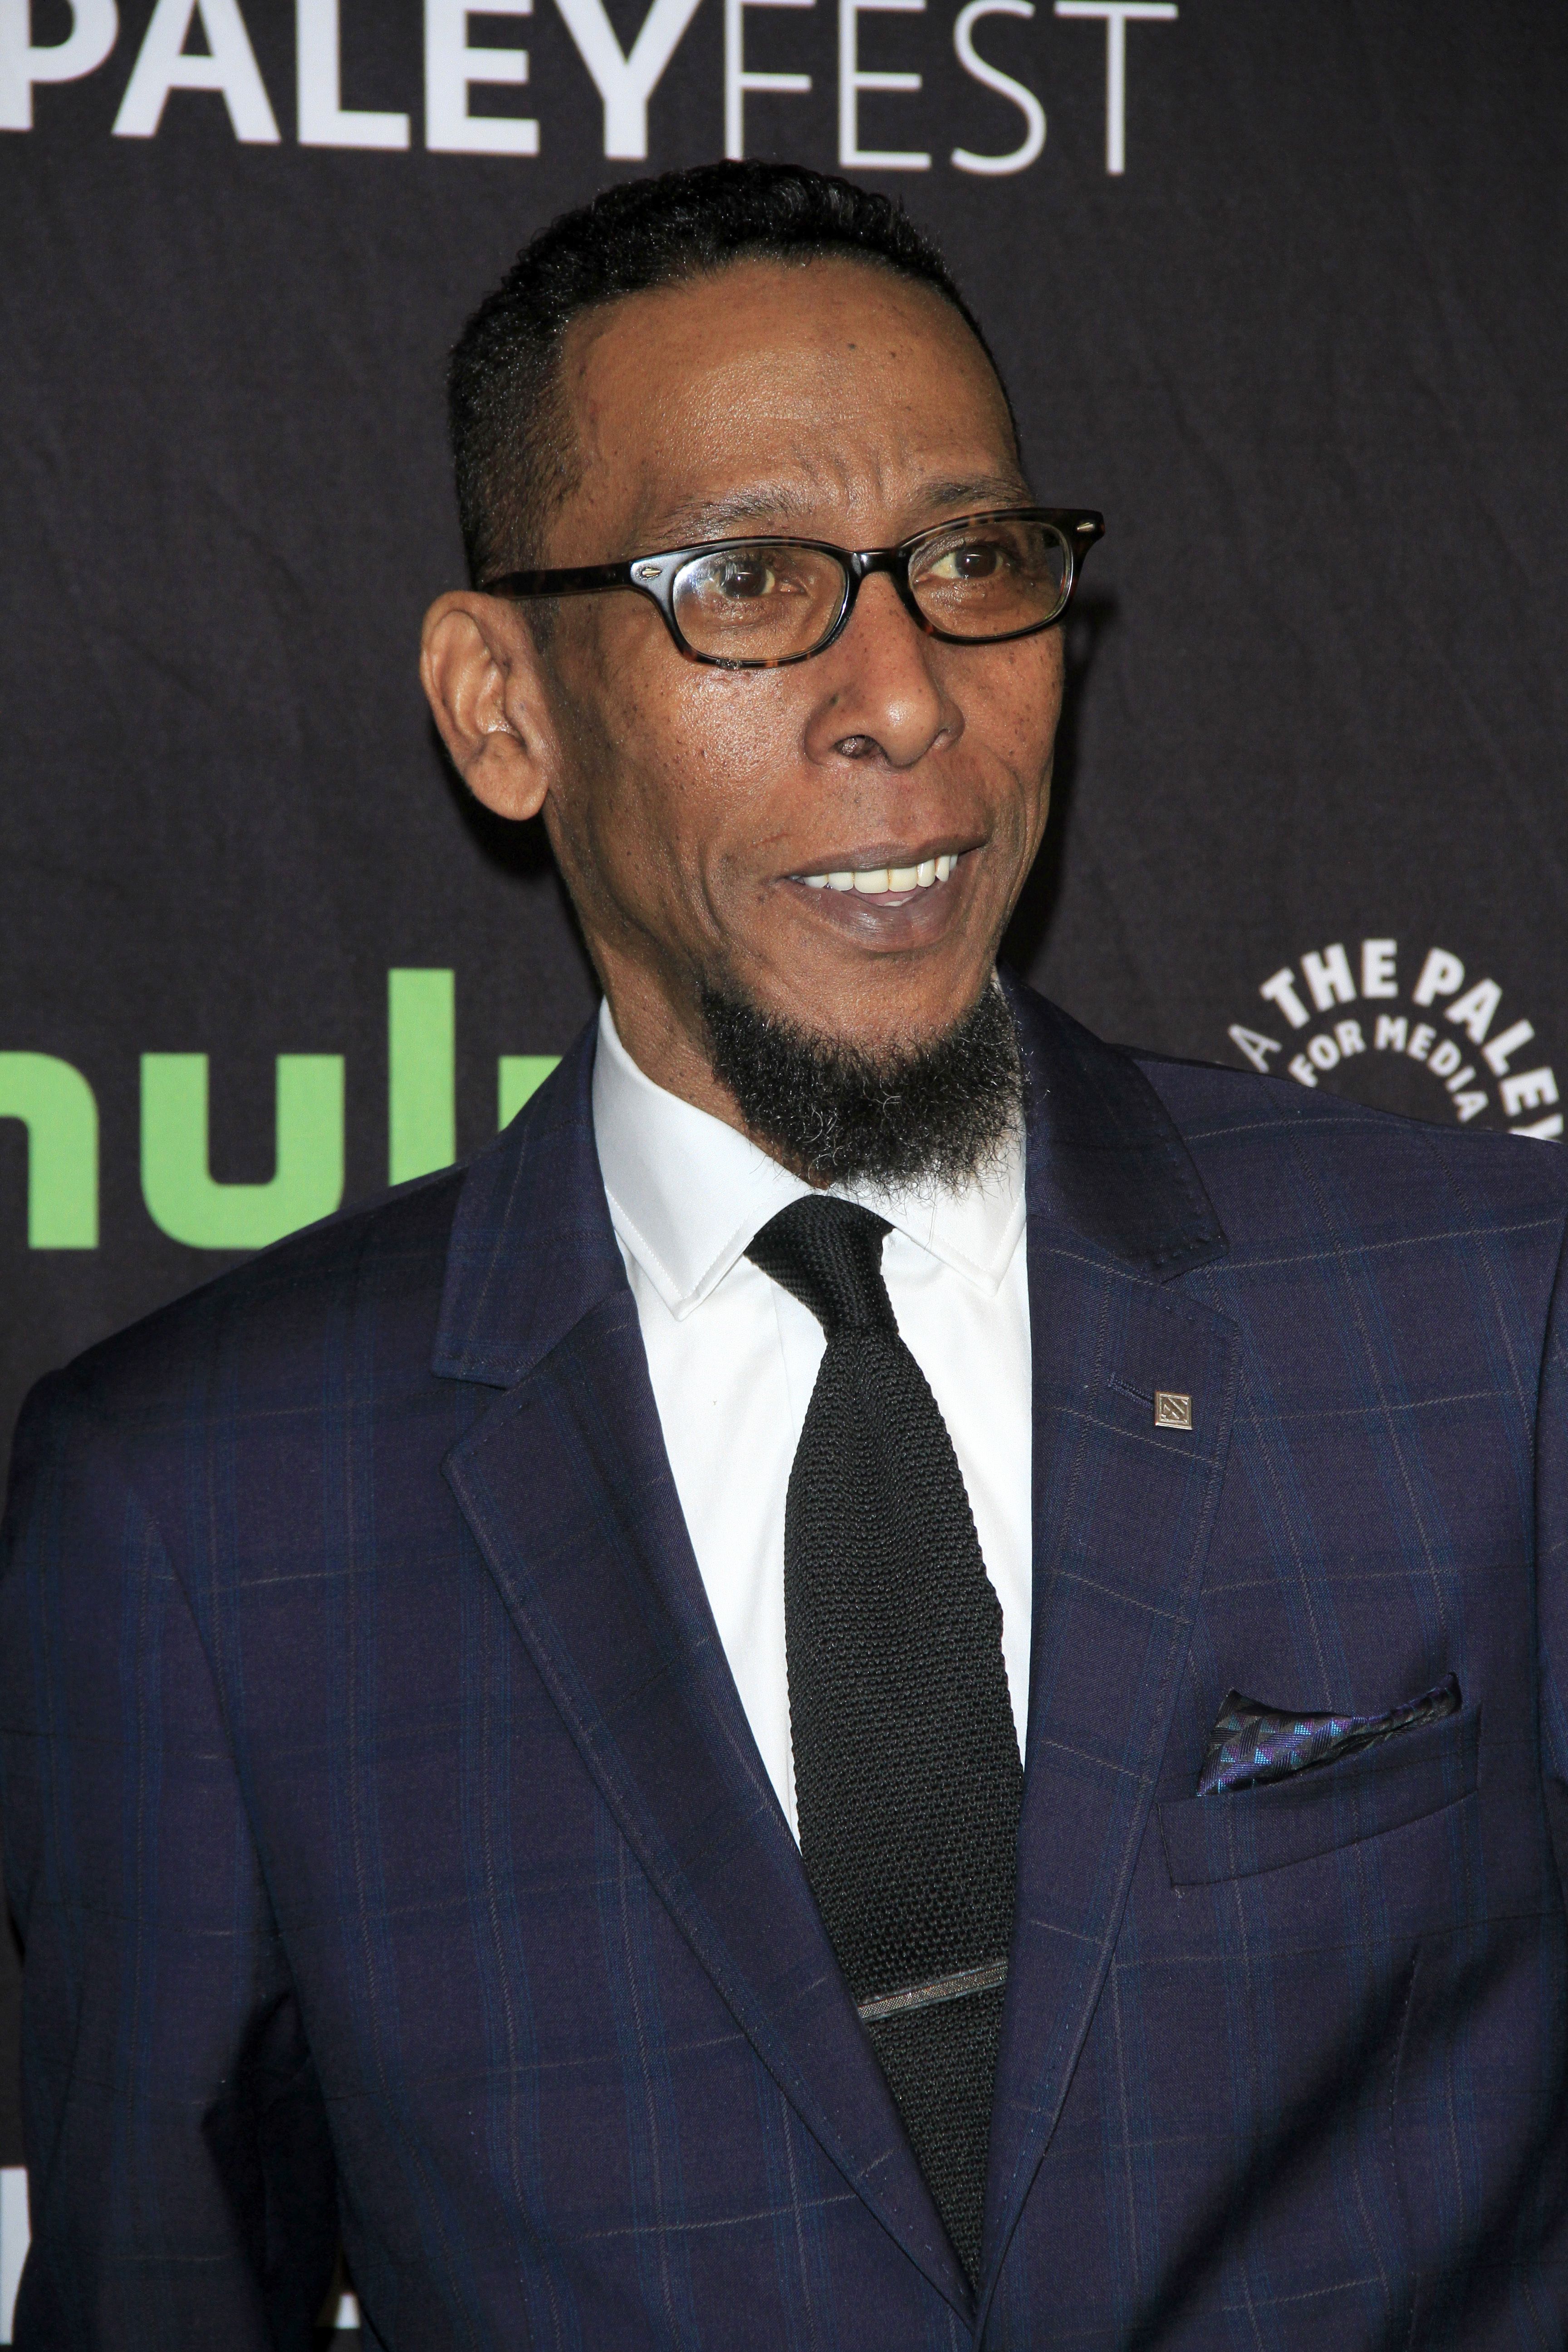 Ron Cephas Jones at the 34th Annual PaleyFest Los Angeles - "The is Us" at Dolby Theater on March 18, 2017 in Los Angeles, CA. | Source: Shutterstock